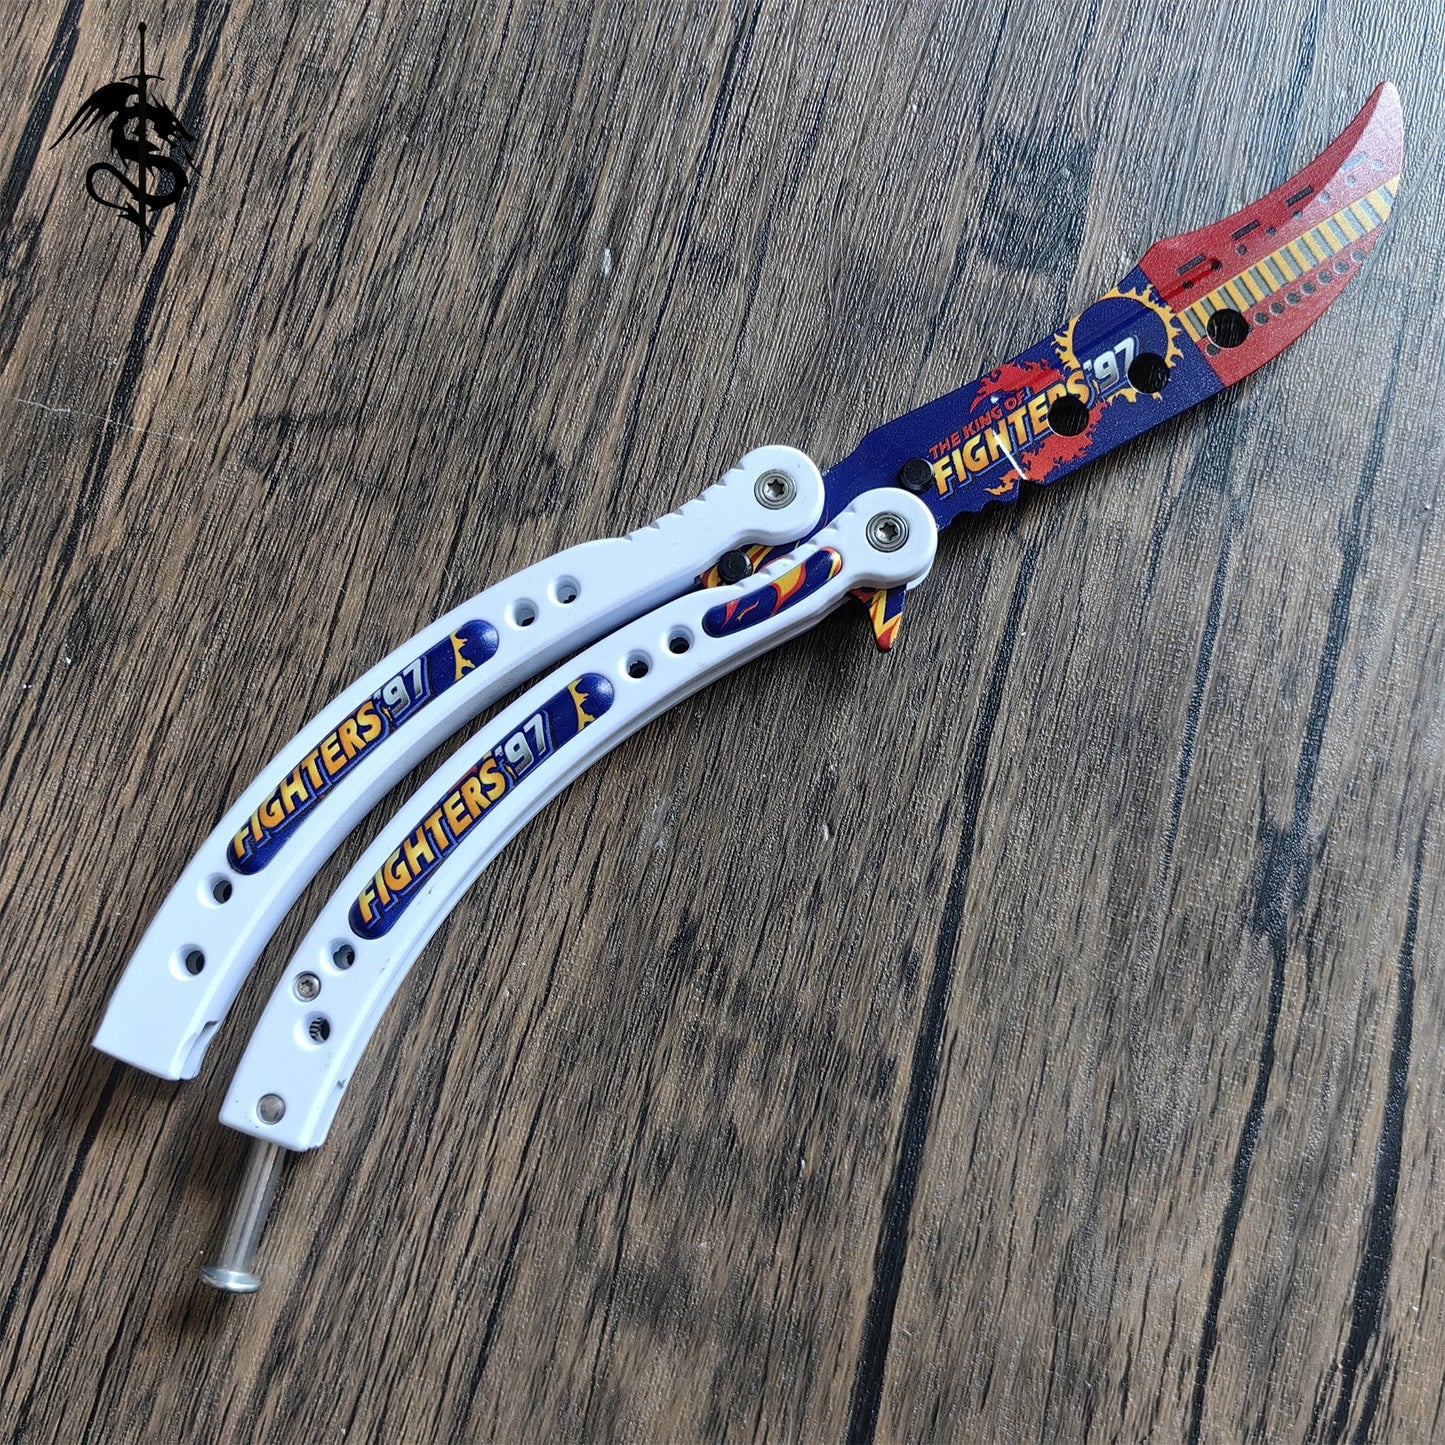 GO Game Steel Balisong Trainer Knife Collection